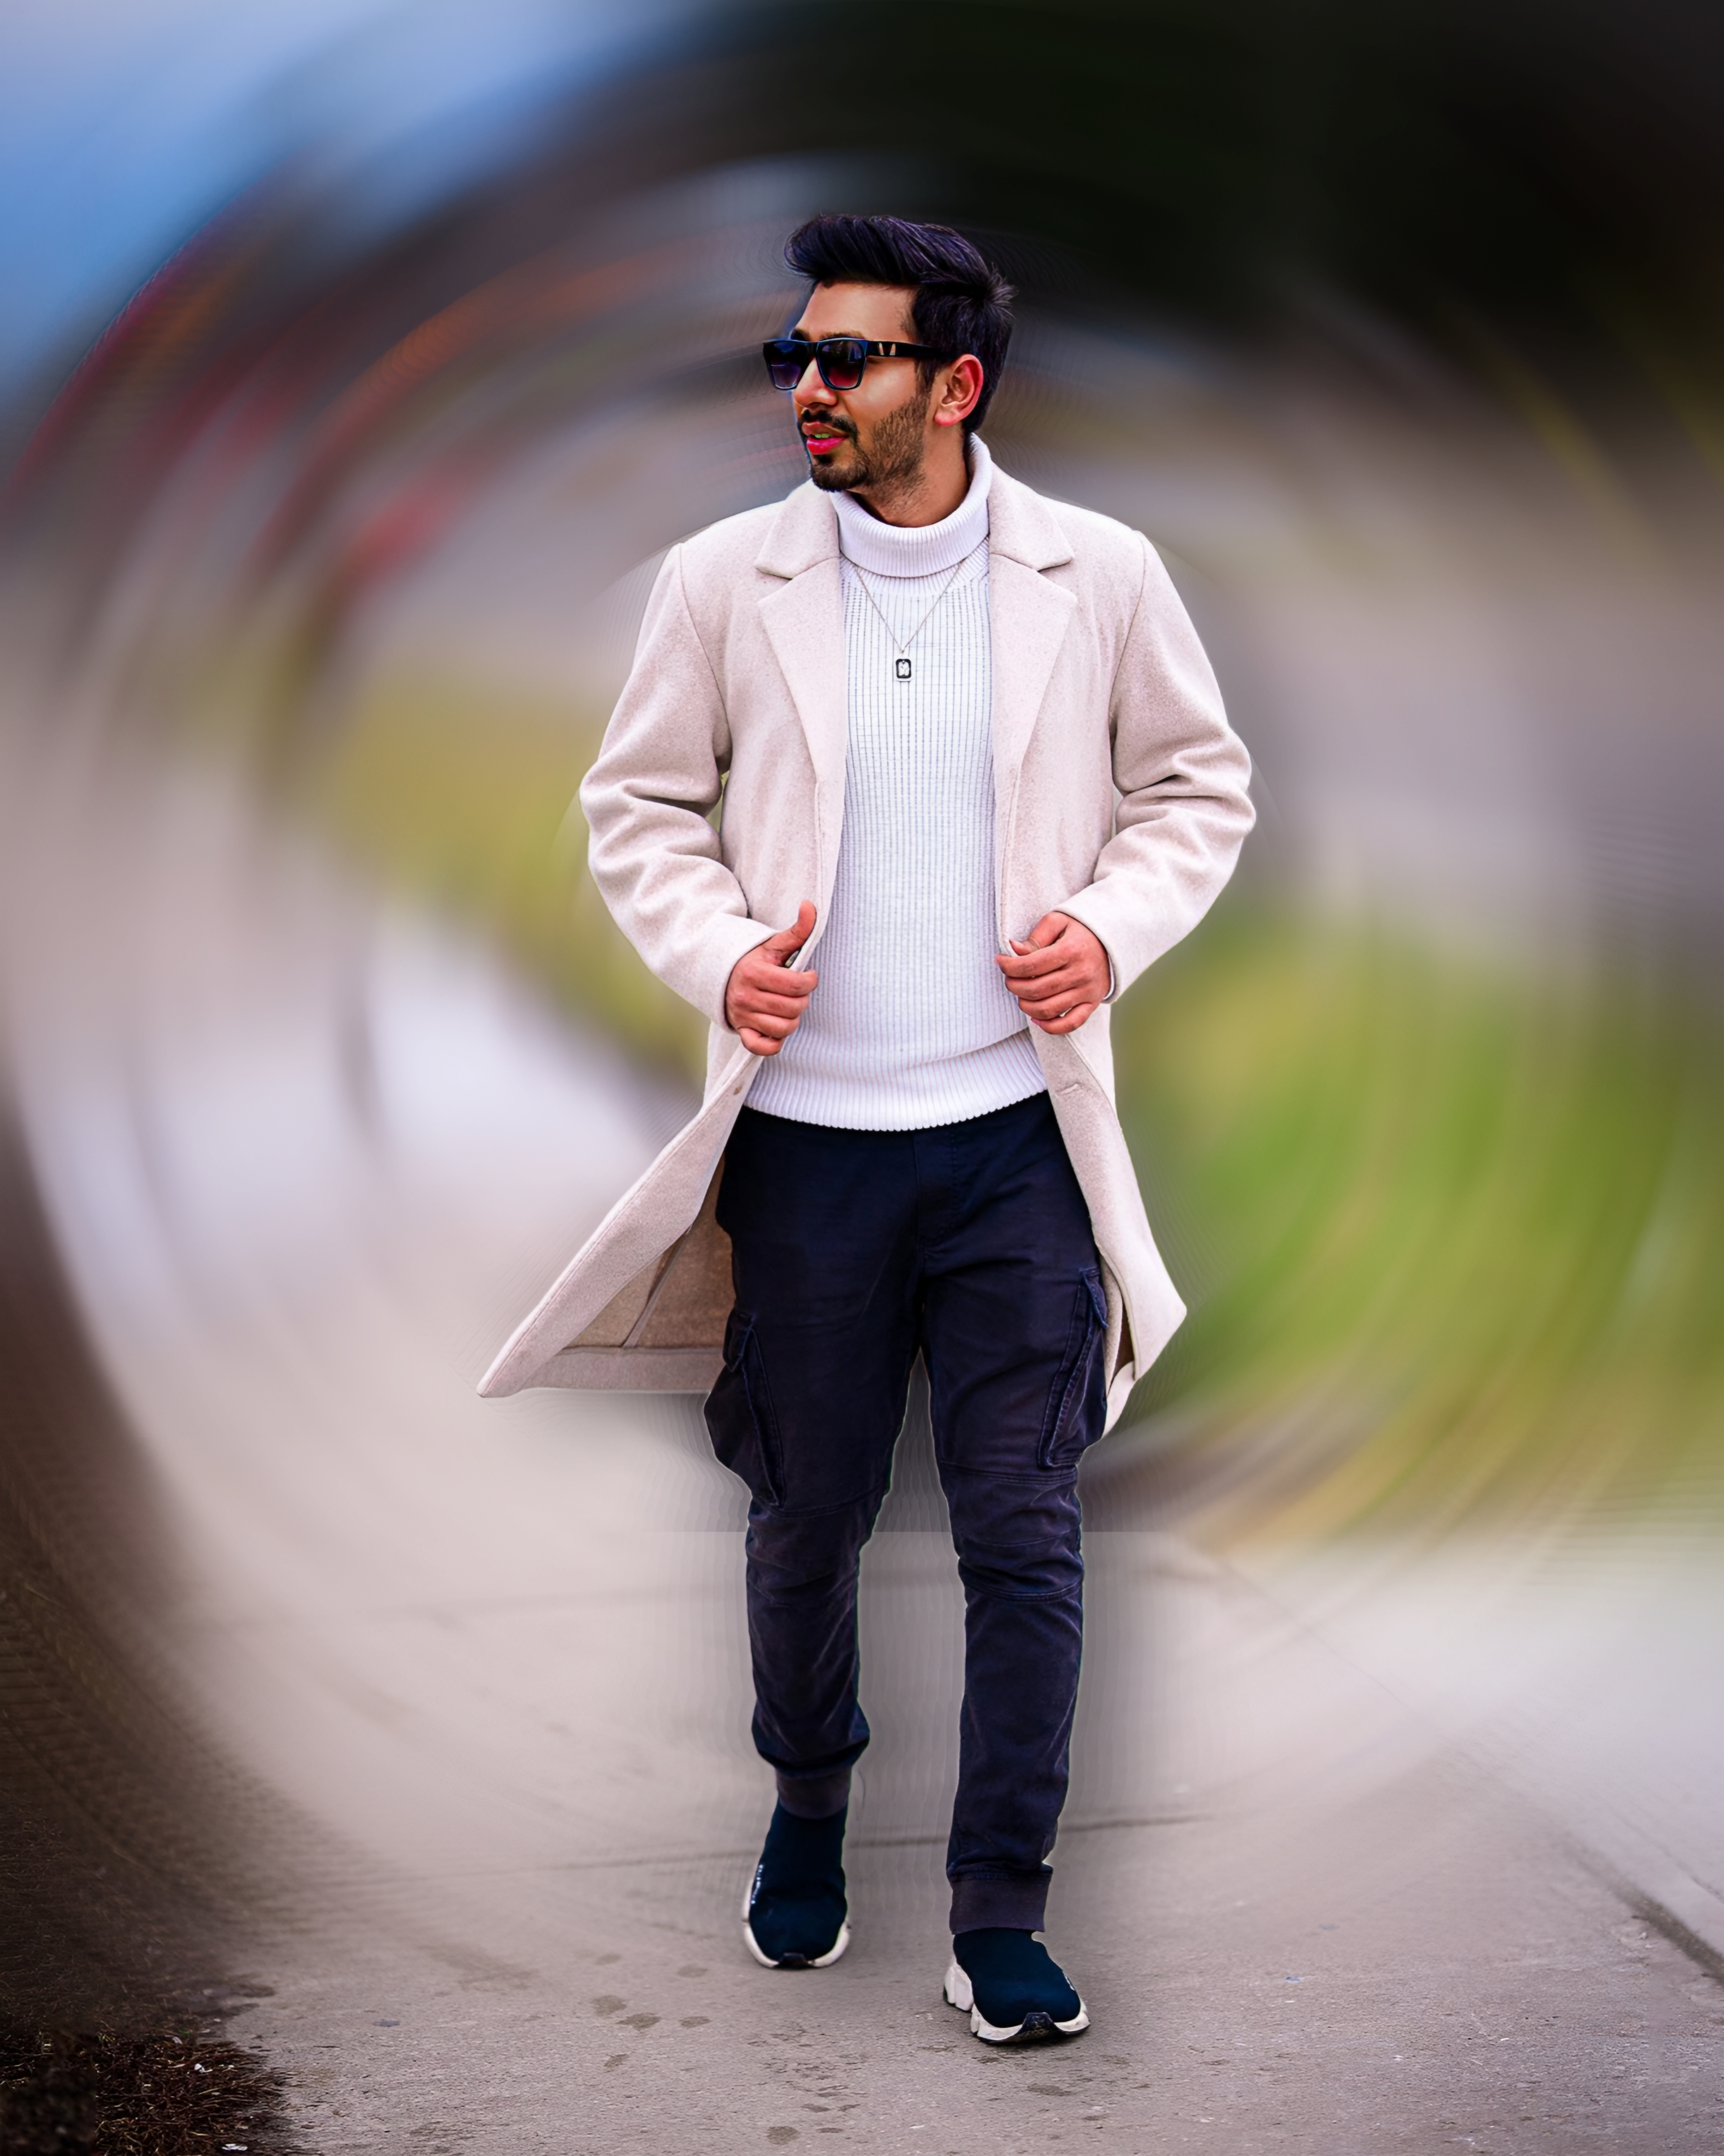 How to make radial Blur Effect Photo || Radial Blur Photo Editing || PicsArt Photo Editing